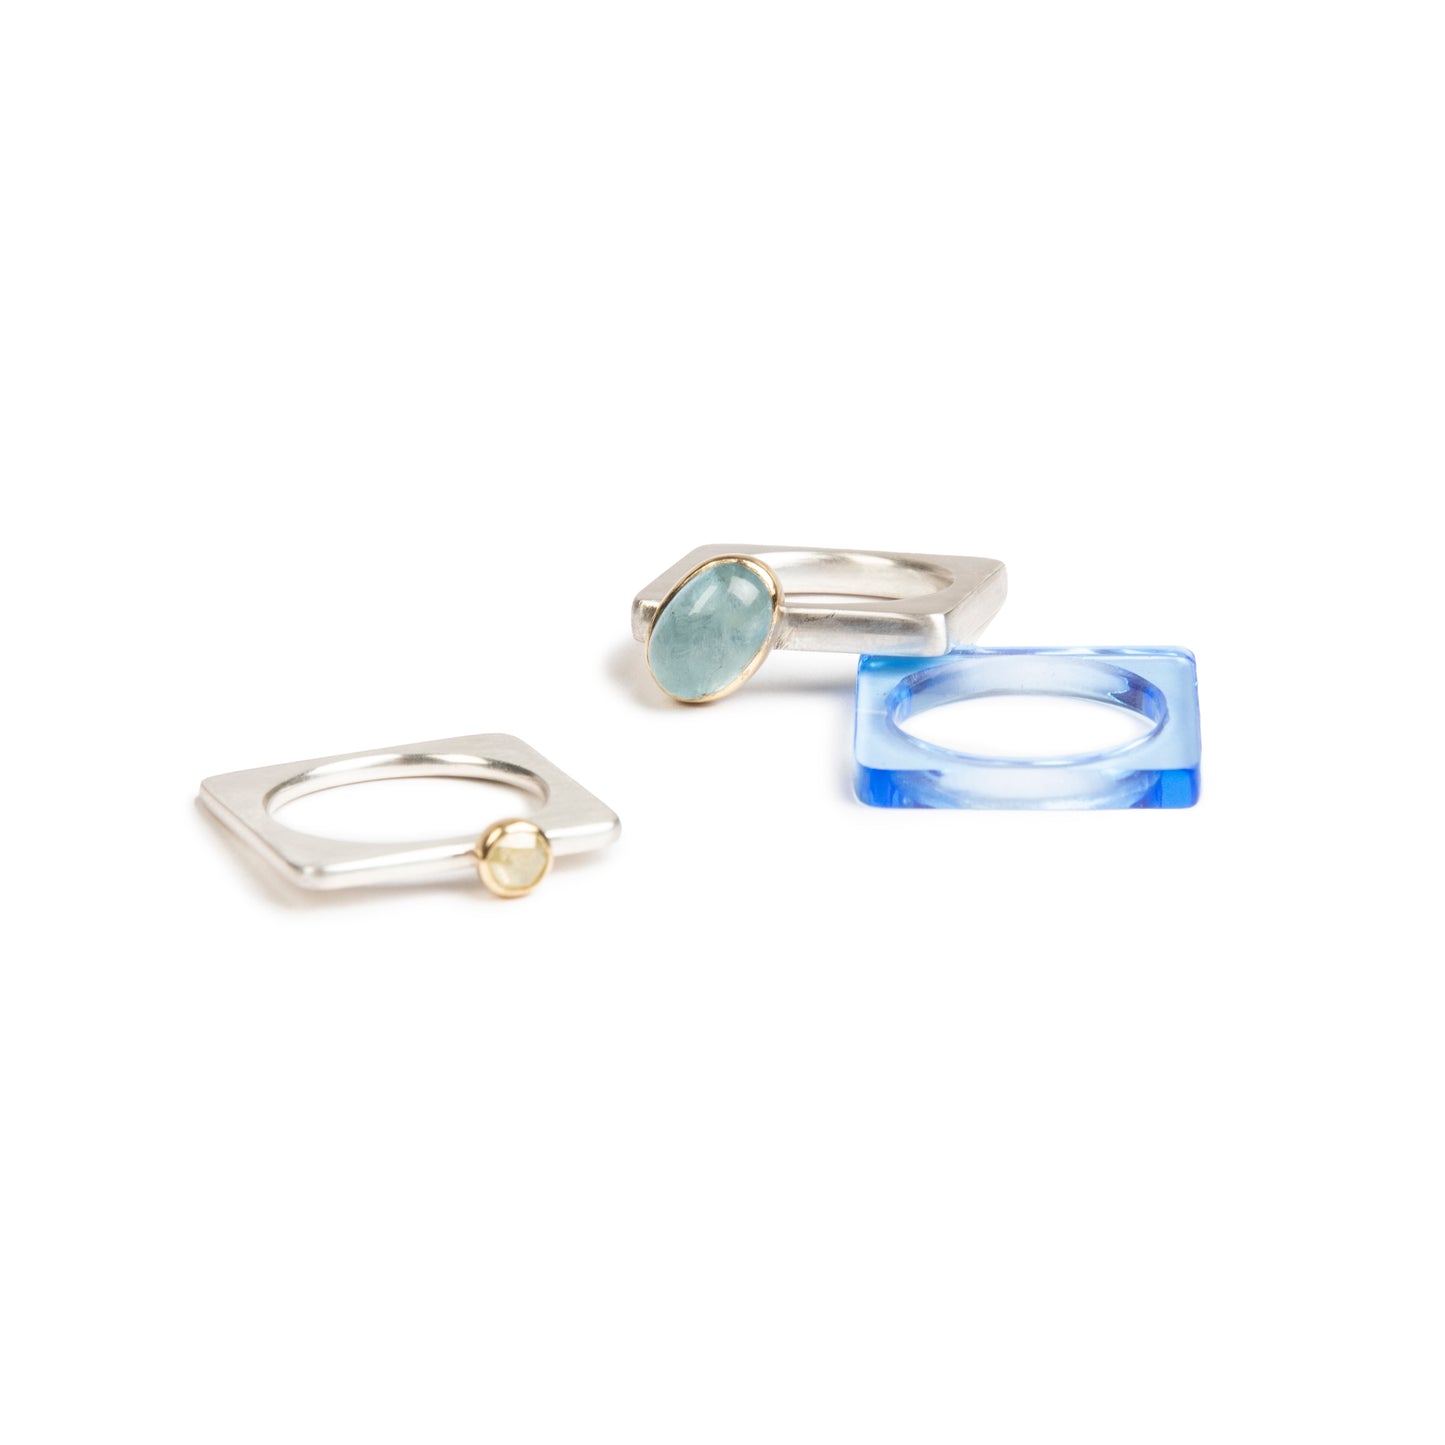 Thick silver ring with oval aquamarine and slim silver ring with diamond. Neptune perspex ring #barbaraspencejewellery